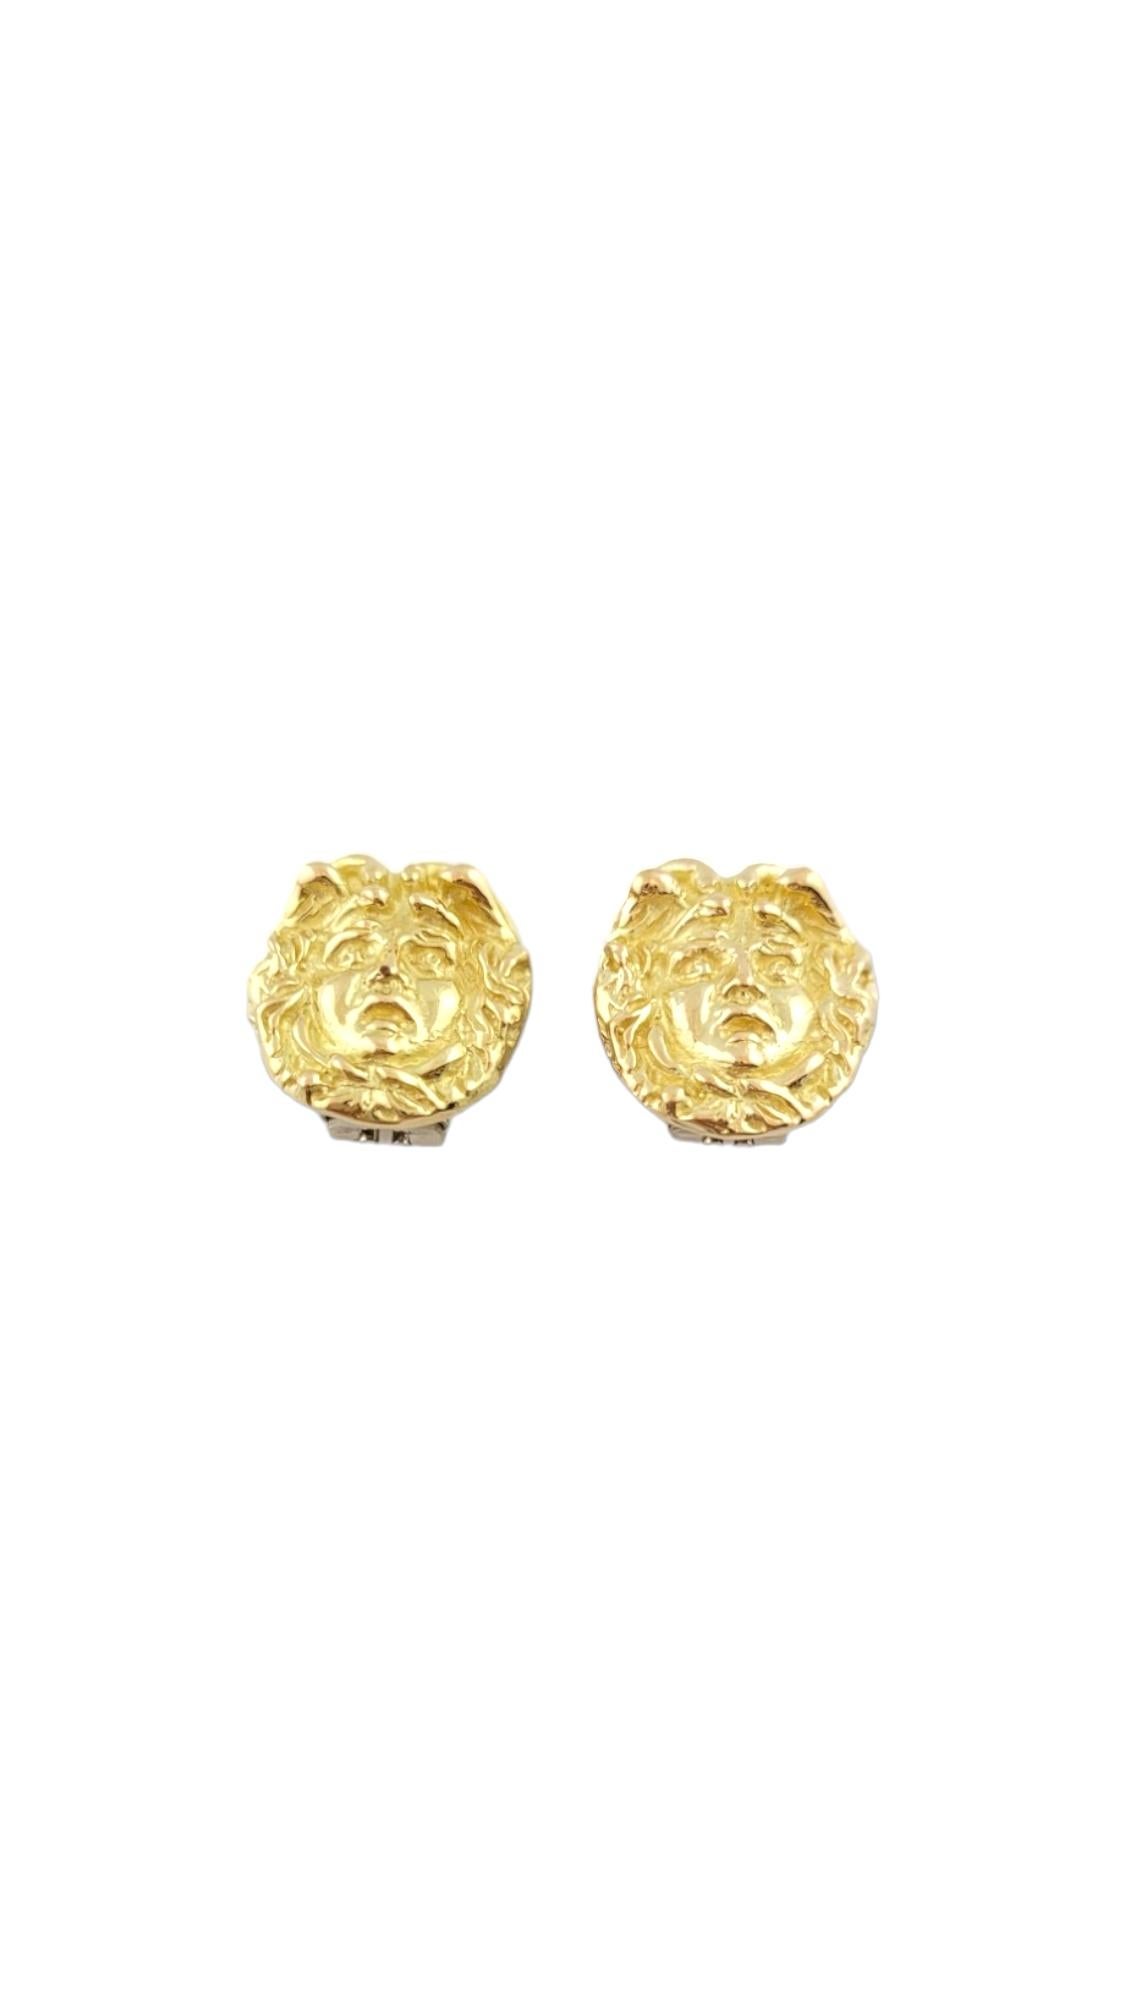 Germano 18K Yellow Gold Italian Medusa Earrings

Germano clip-on earrings with Medusa's face in 18K yellow gold.

Tested 18K.

Hallmark: GERMANO

Weight: 12.85 g/ 8.26 dwt.

Measurements: 16.95 mm X 15.96 mm X 3.71 mm/ .667 in. X .628 in. X .14